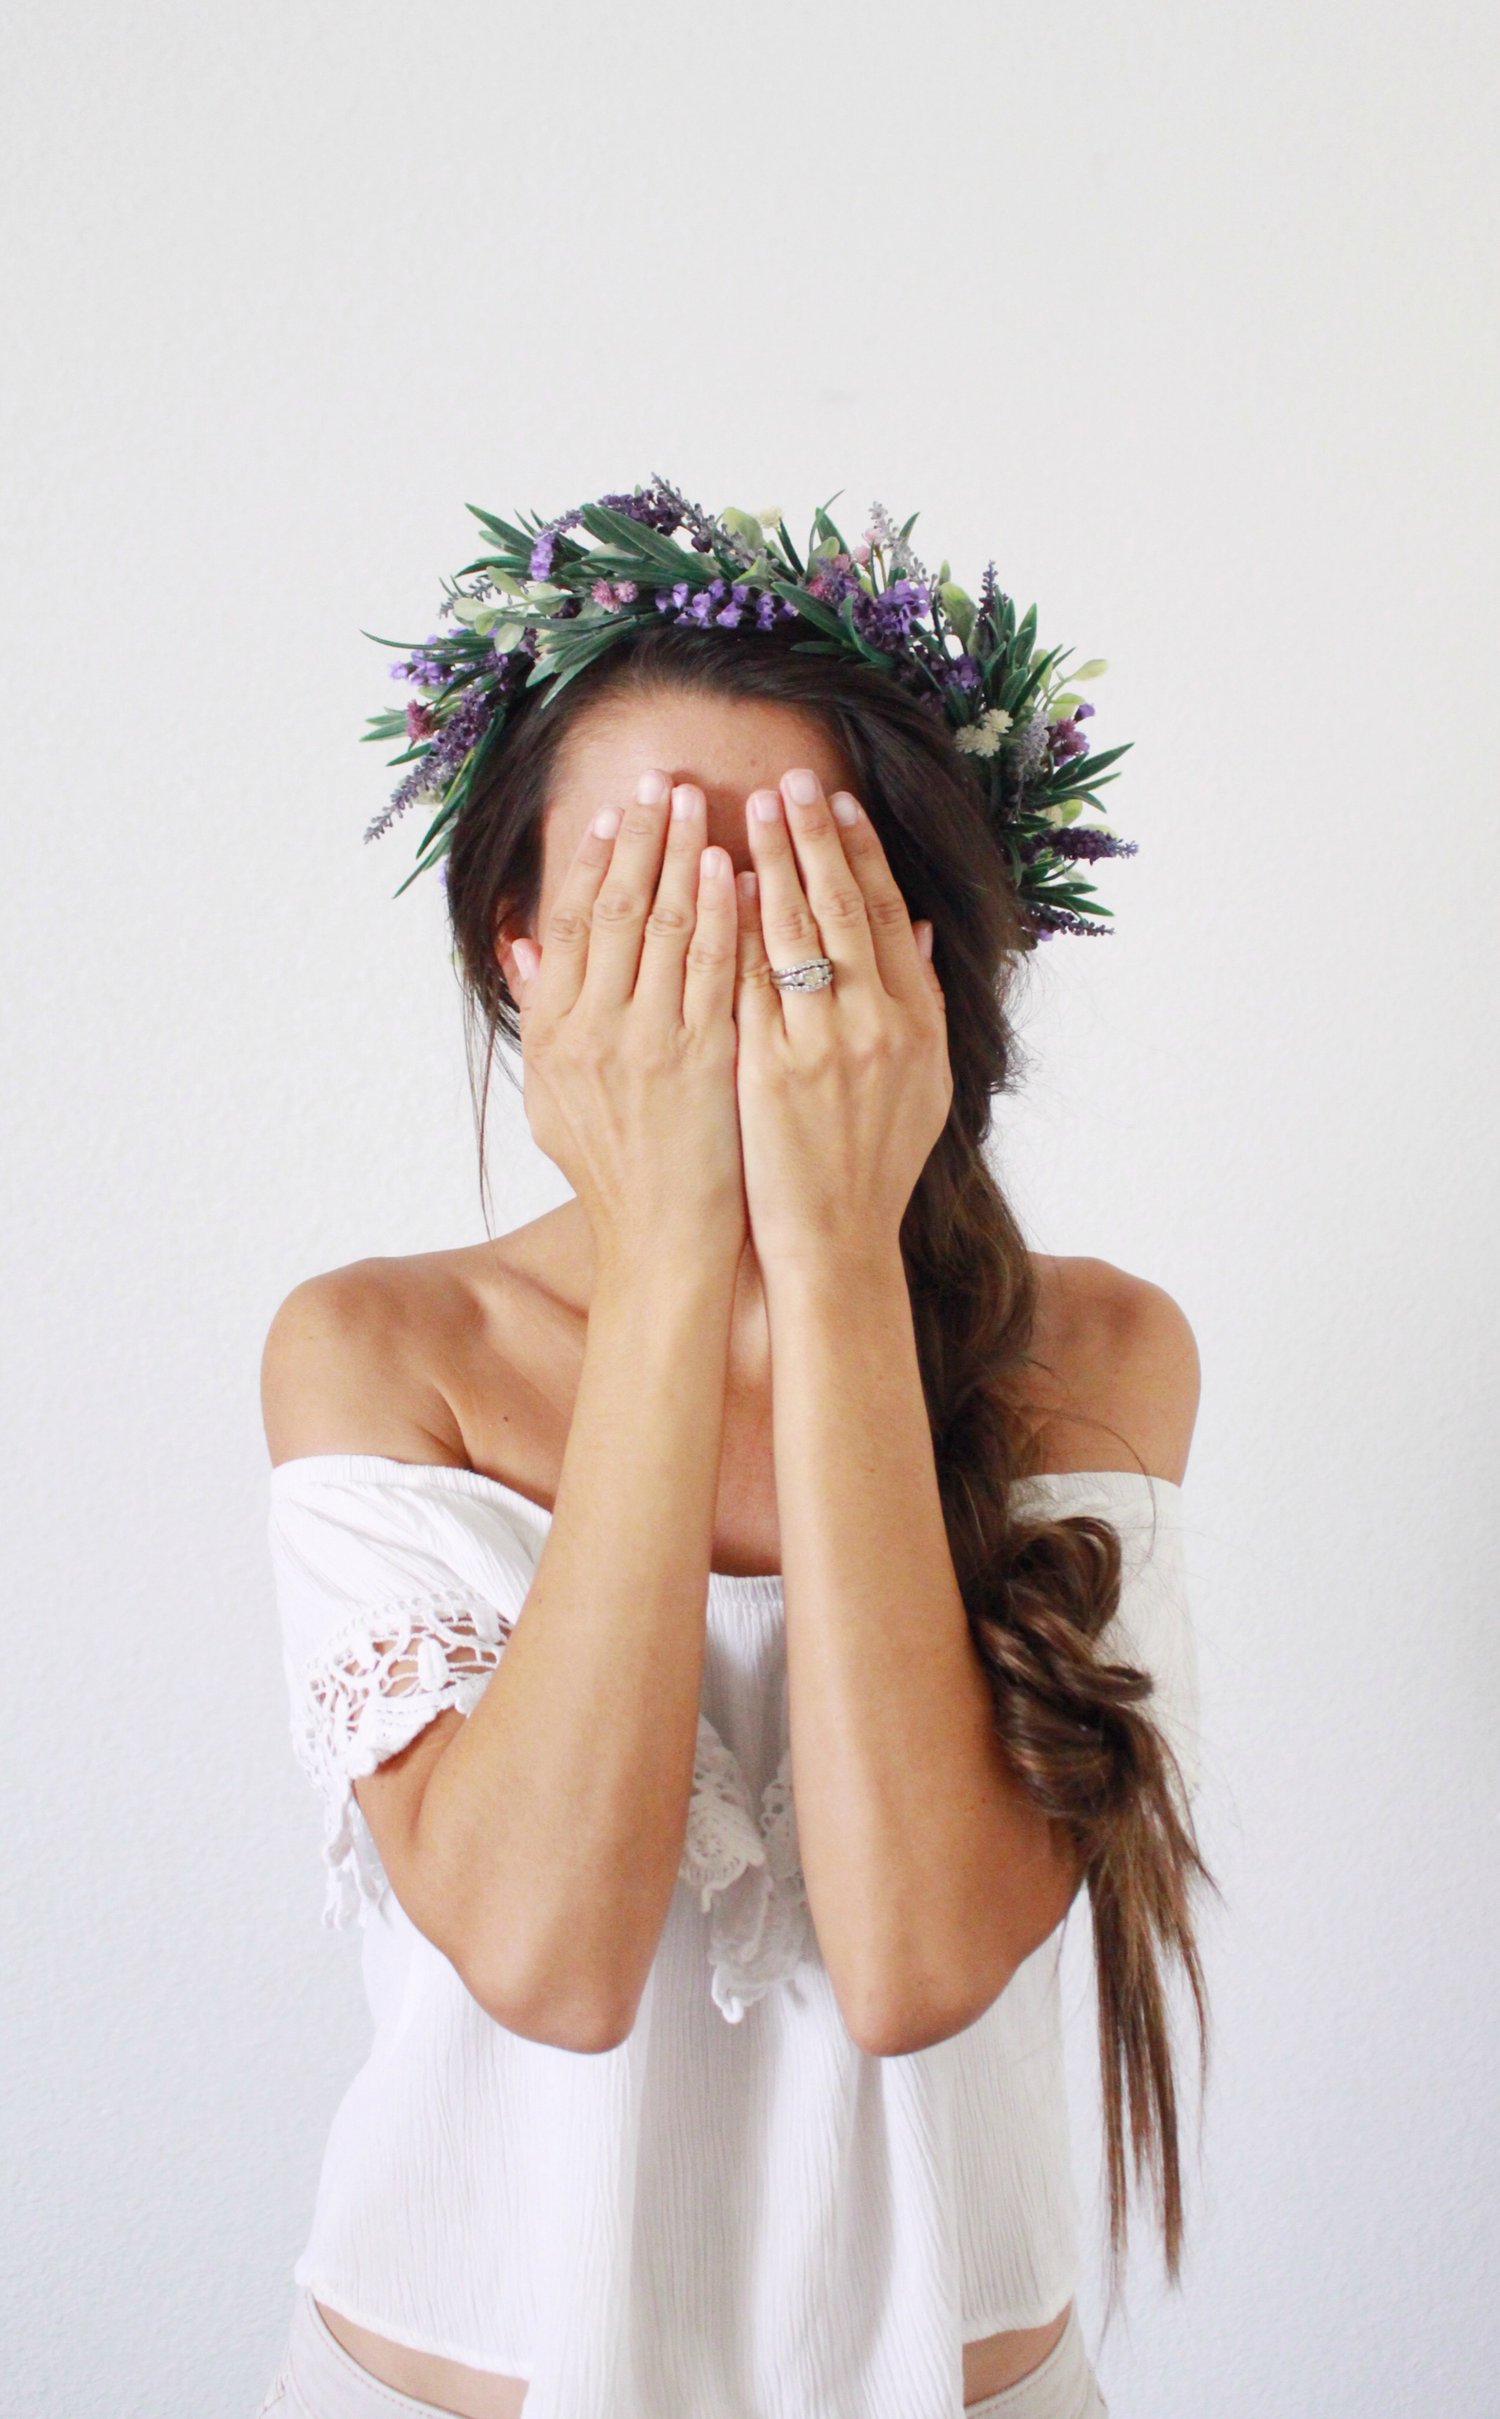 braided+hairstyle+with+flower+crown.+diy+lavender+flower+crown.+flower+crown+style.+hairstyle